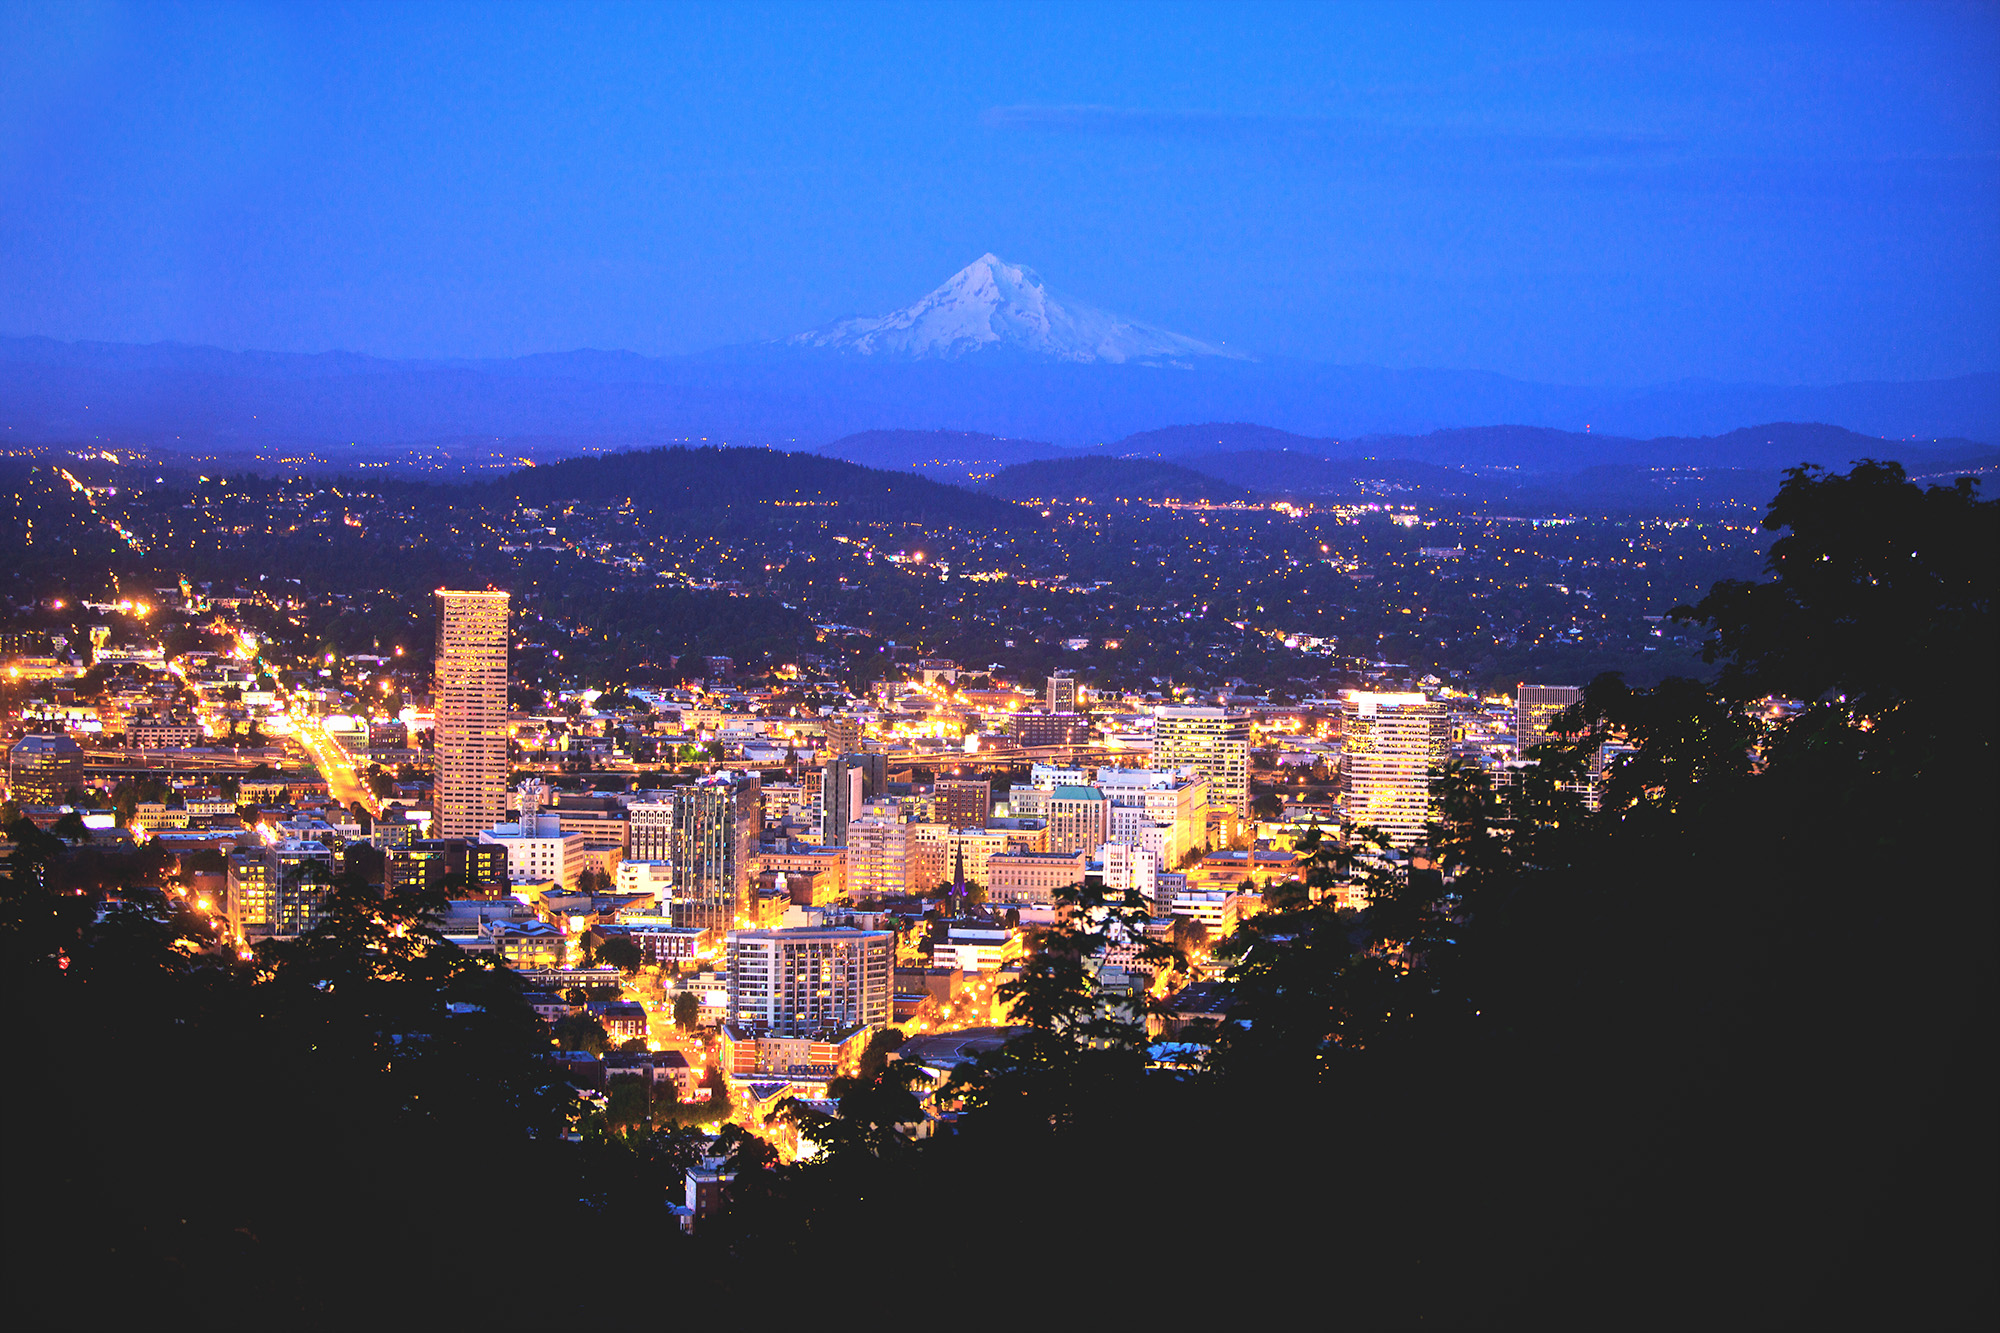 A lighted up Portland city with a snow capped Mt Hood dimly visible in the distant night sky